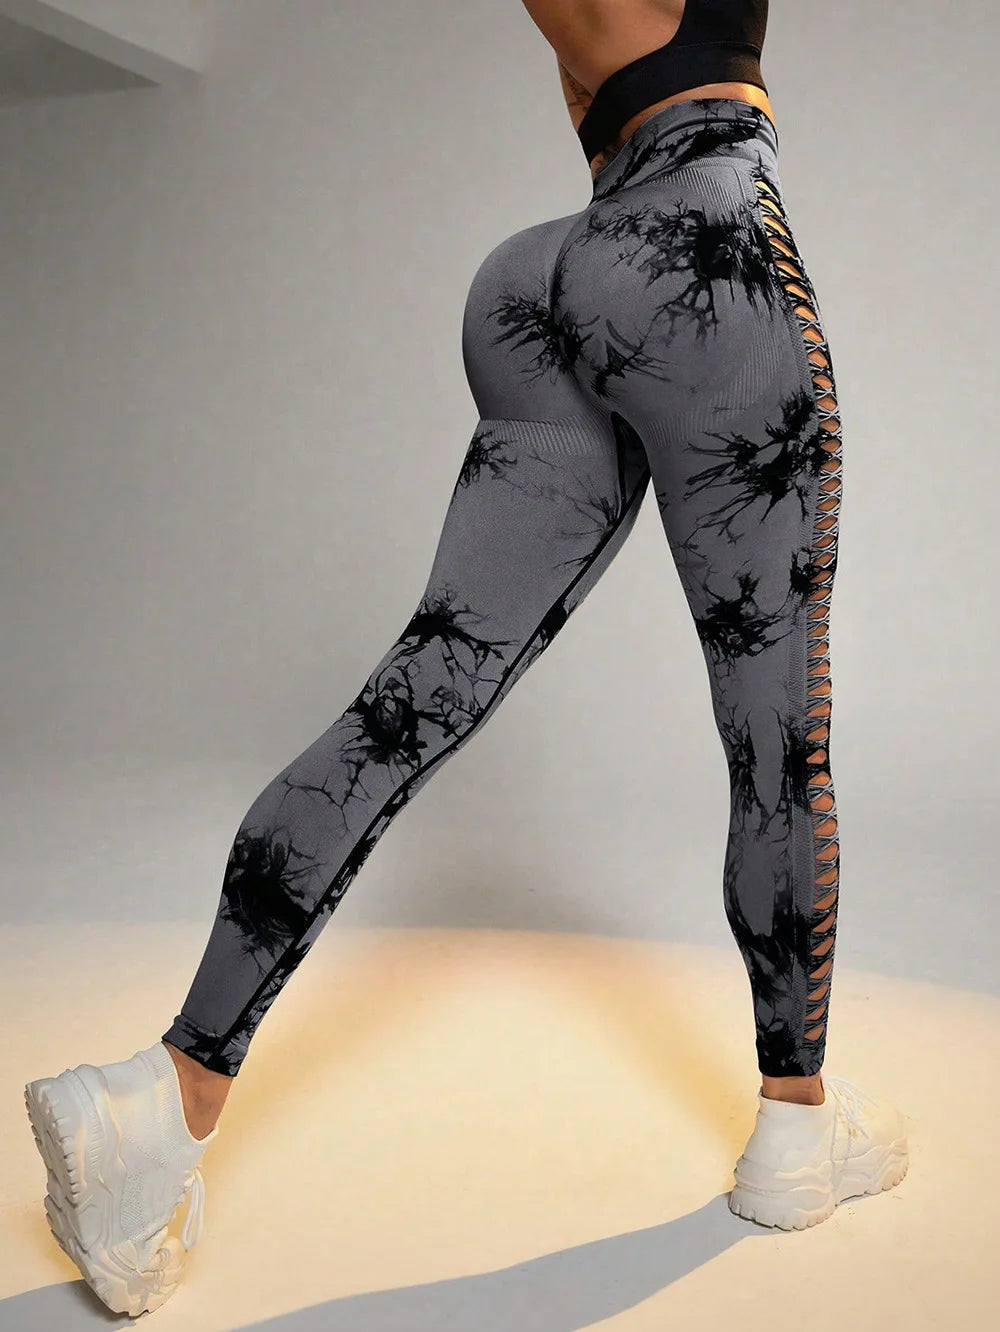 Upgrade Your Workout with Sexy Tie-Dye Yoga Leggings - High Waist, Slim Fit, Breathable - Perfect for Gym, Yoga, and Running!